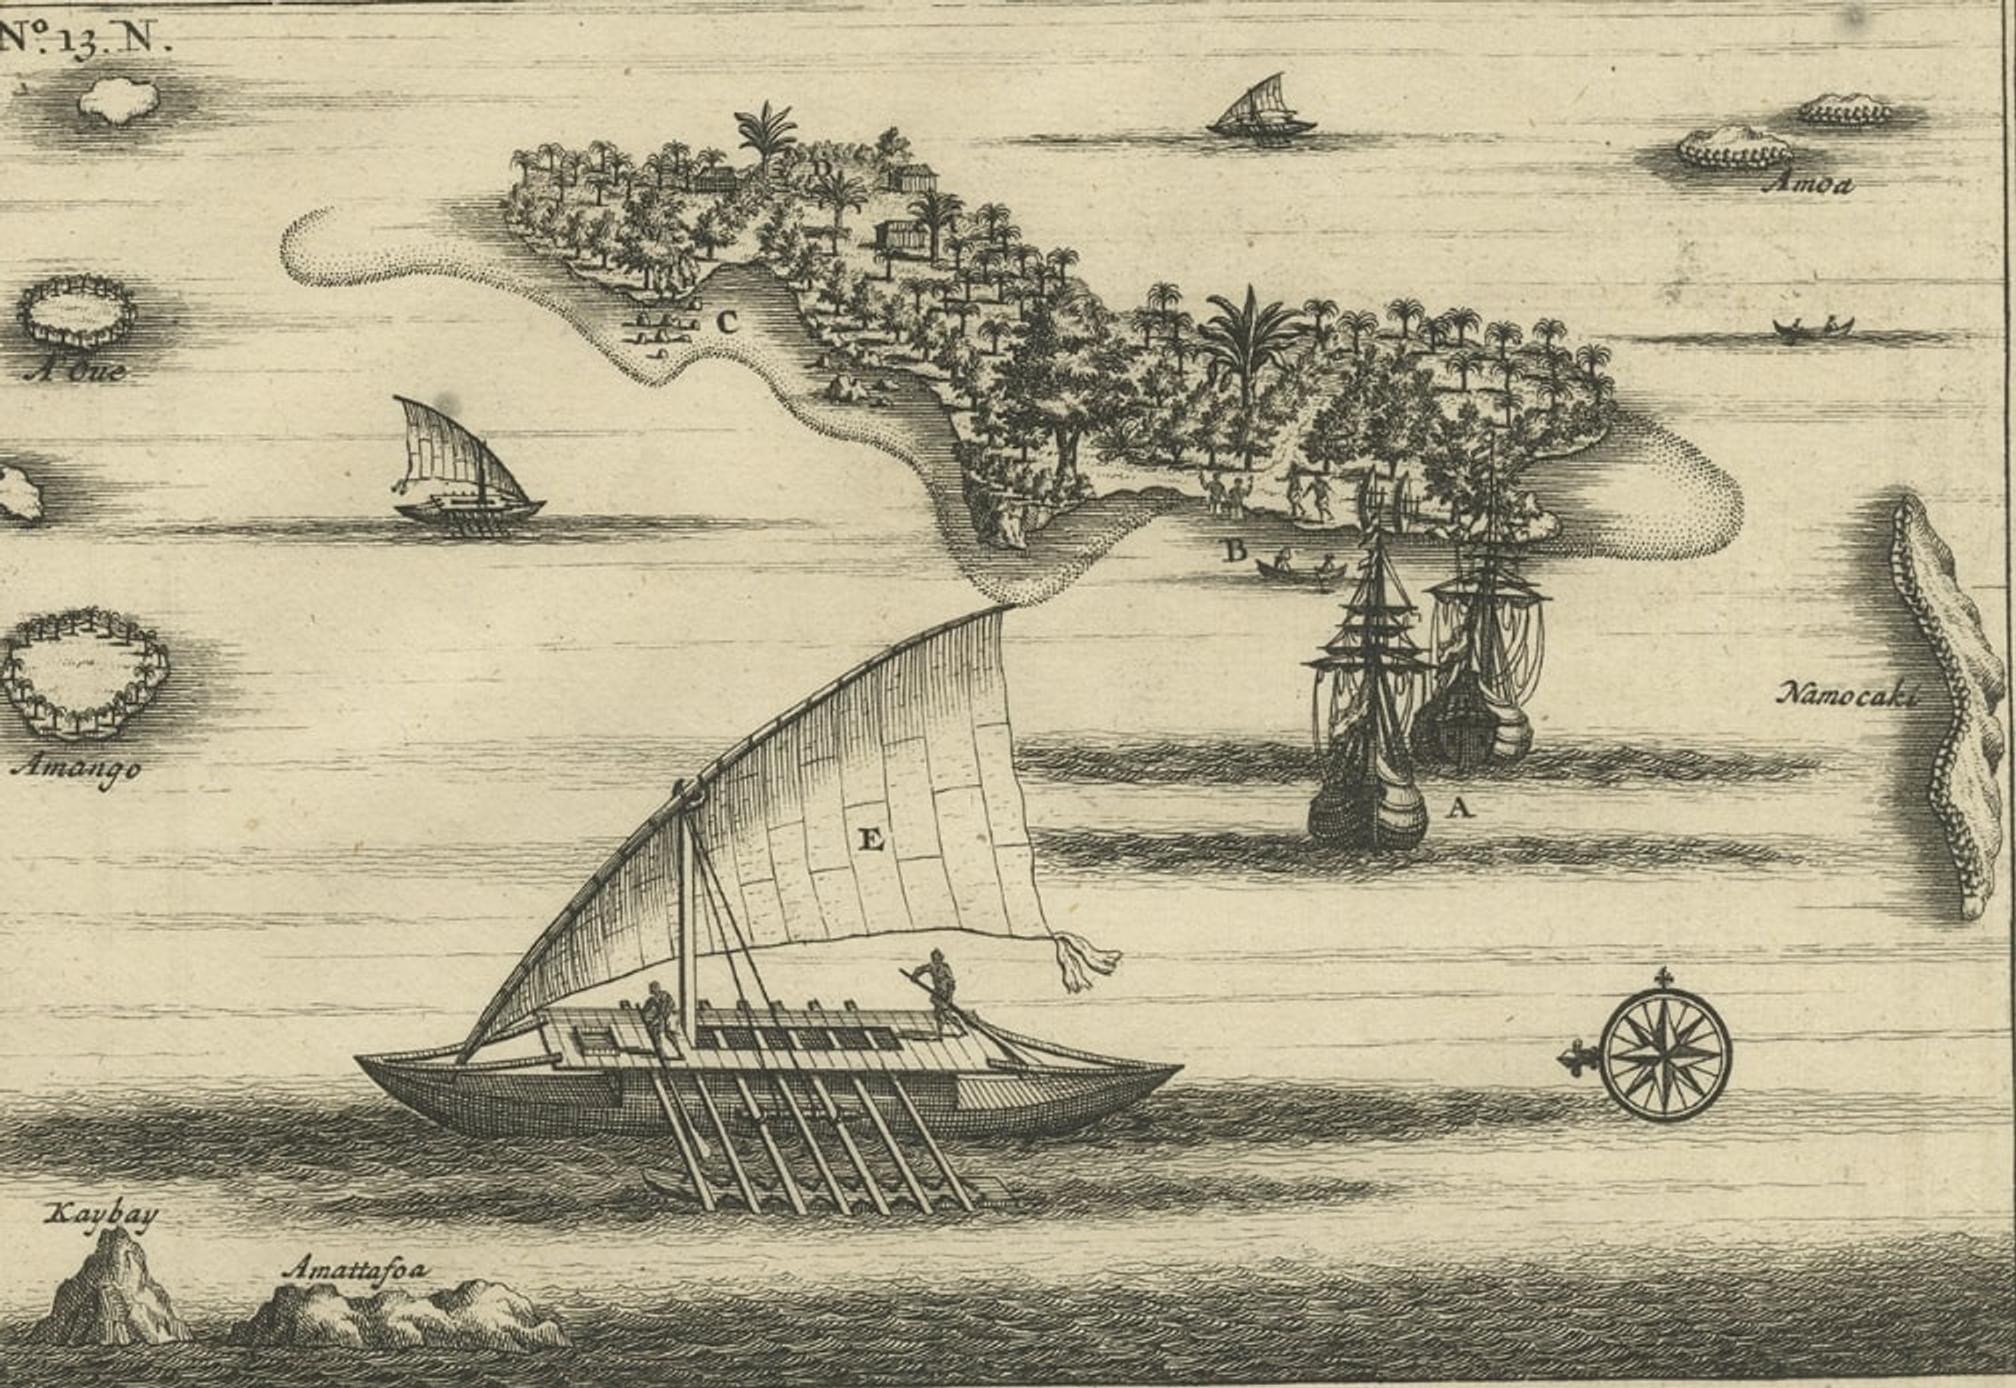 Antique print Indonesia titled 'Anamocka by ons genaemt 't Eylant Rotterdam'. Two engravings on one sheet showing the boats and peoples of Anamocka Island in the islands of Tonga. This print originates from 'Oud en Nieuw Oost-Indiën' by F.